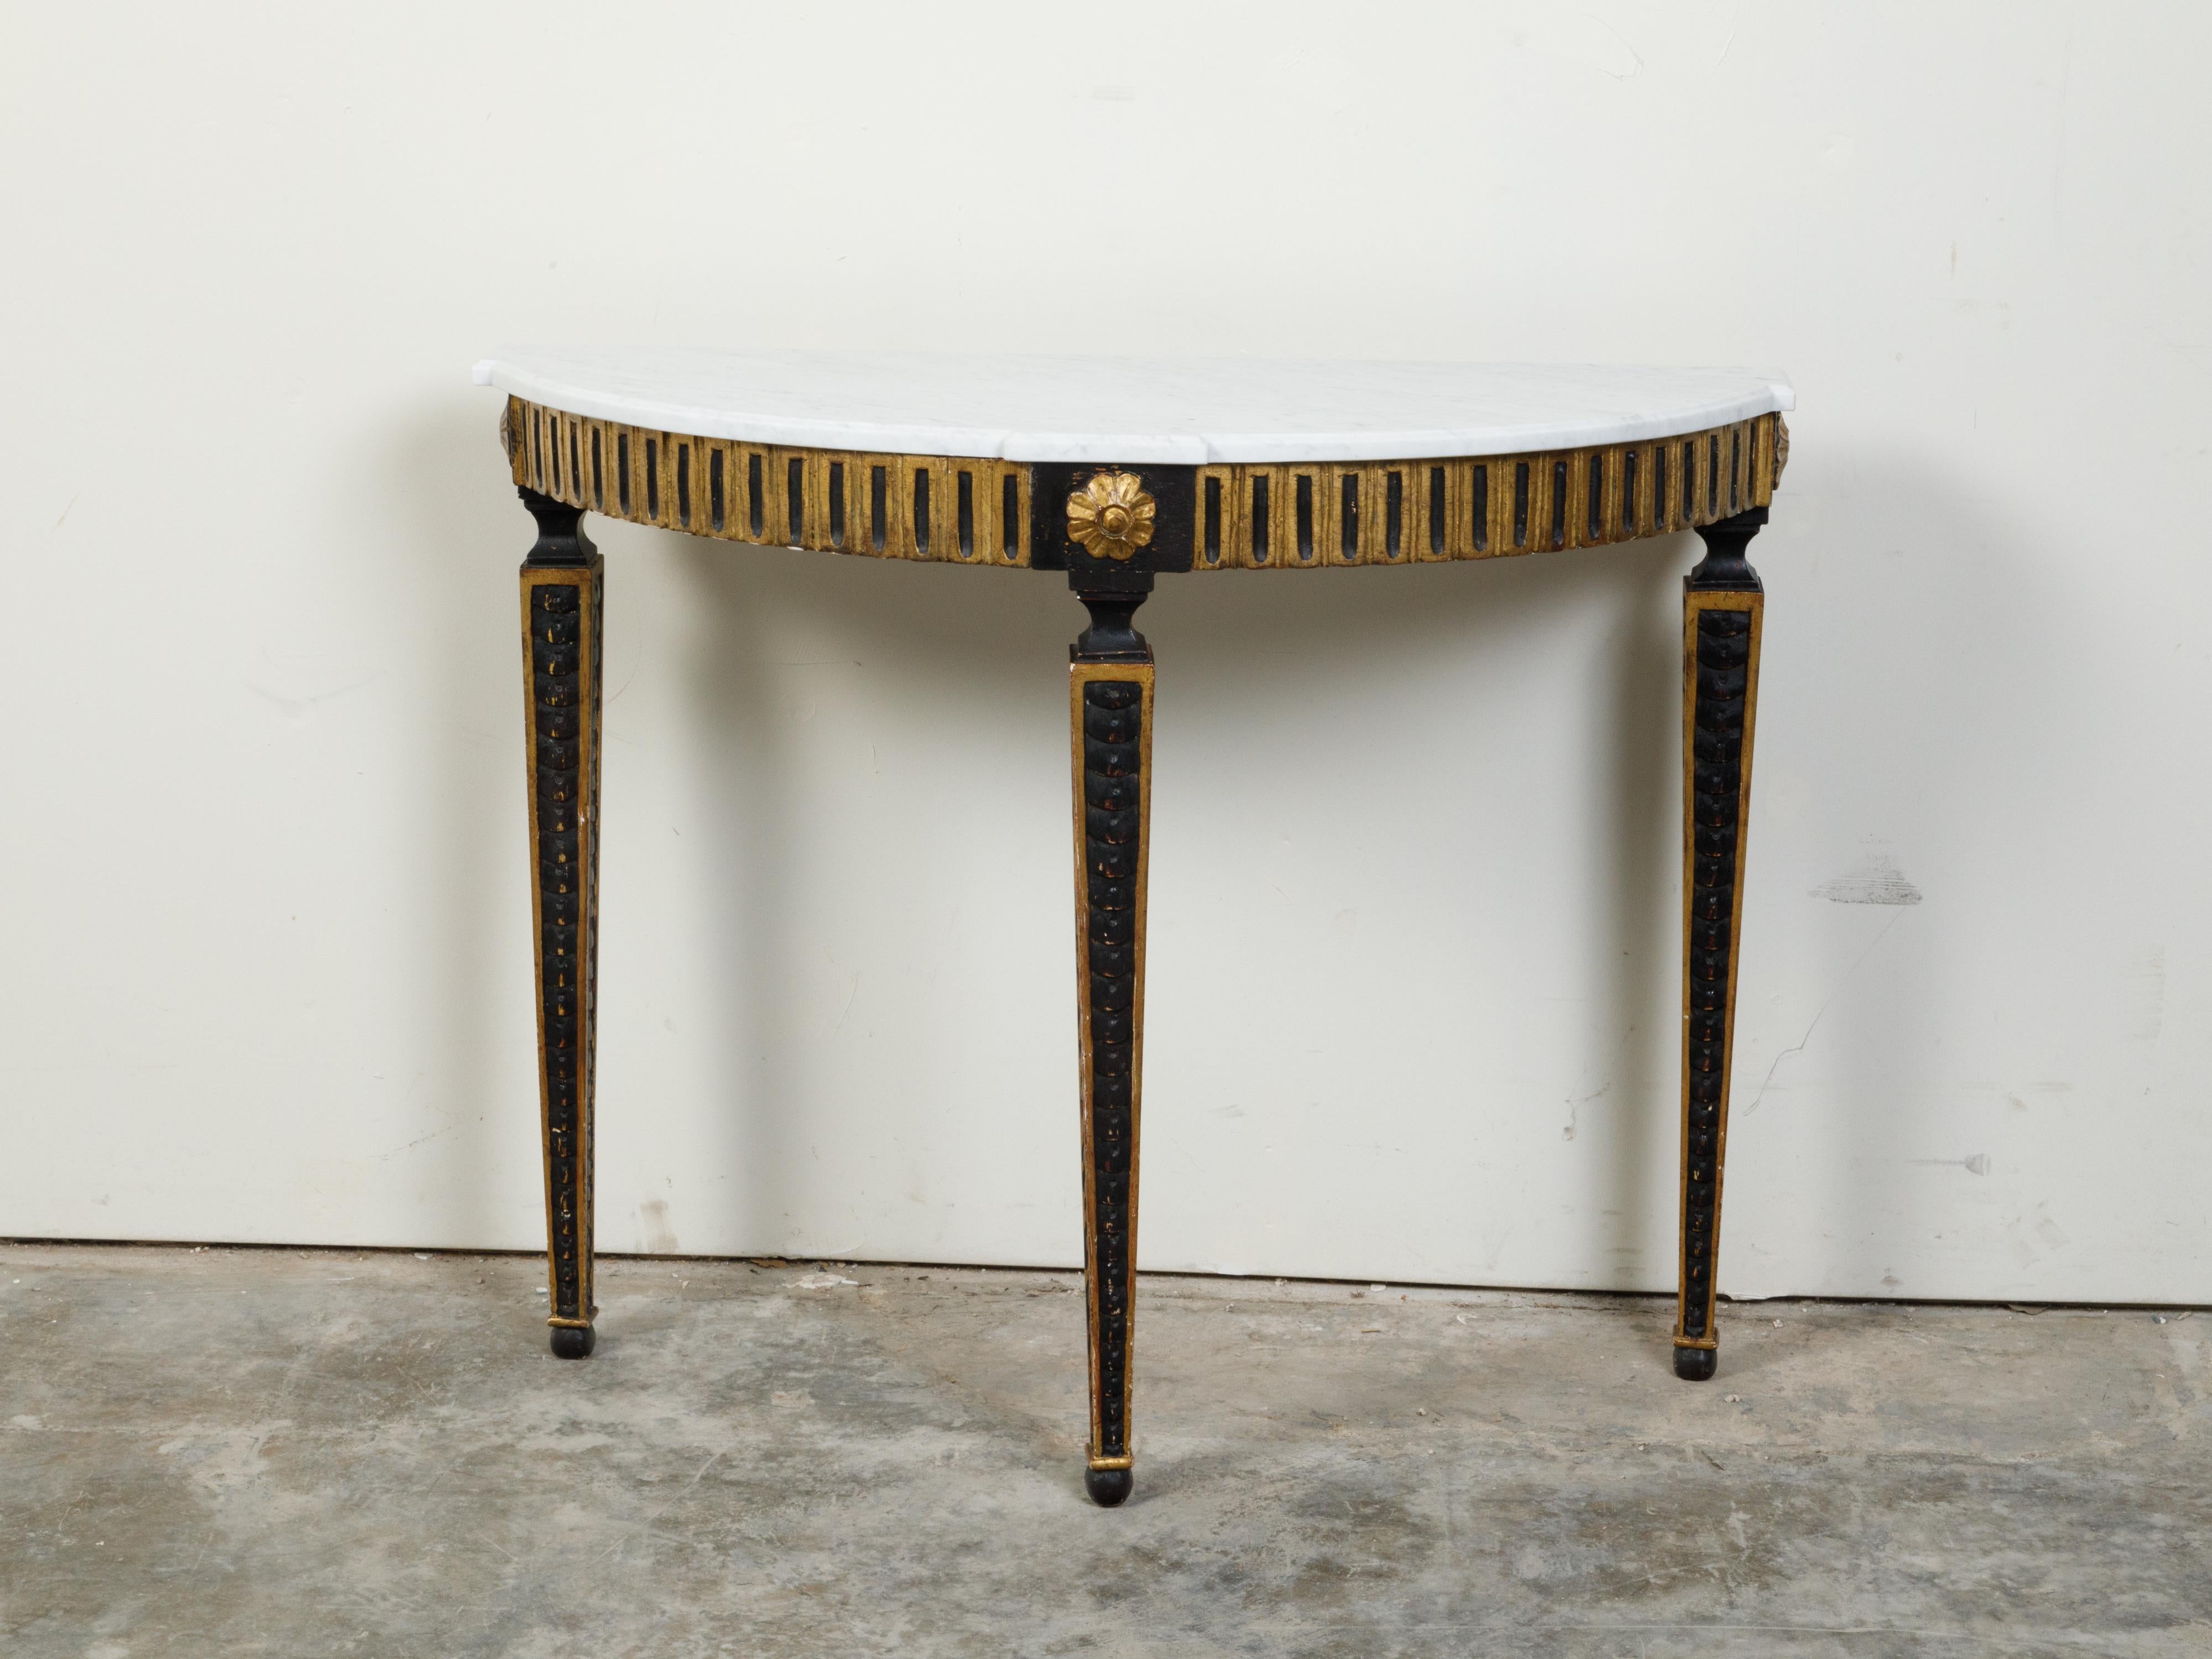 An Italian neoclassical style black parcel-gilt demi-lune console table from the 19th century, with white marble top and fluted motifs. Created in Italy during the 19th century, this demilune features a semi-circular white marble top with protruding